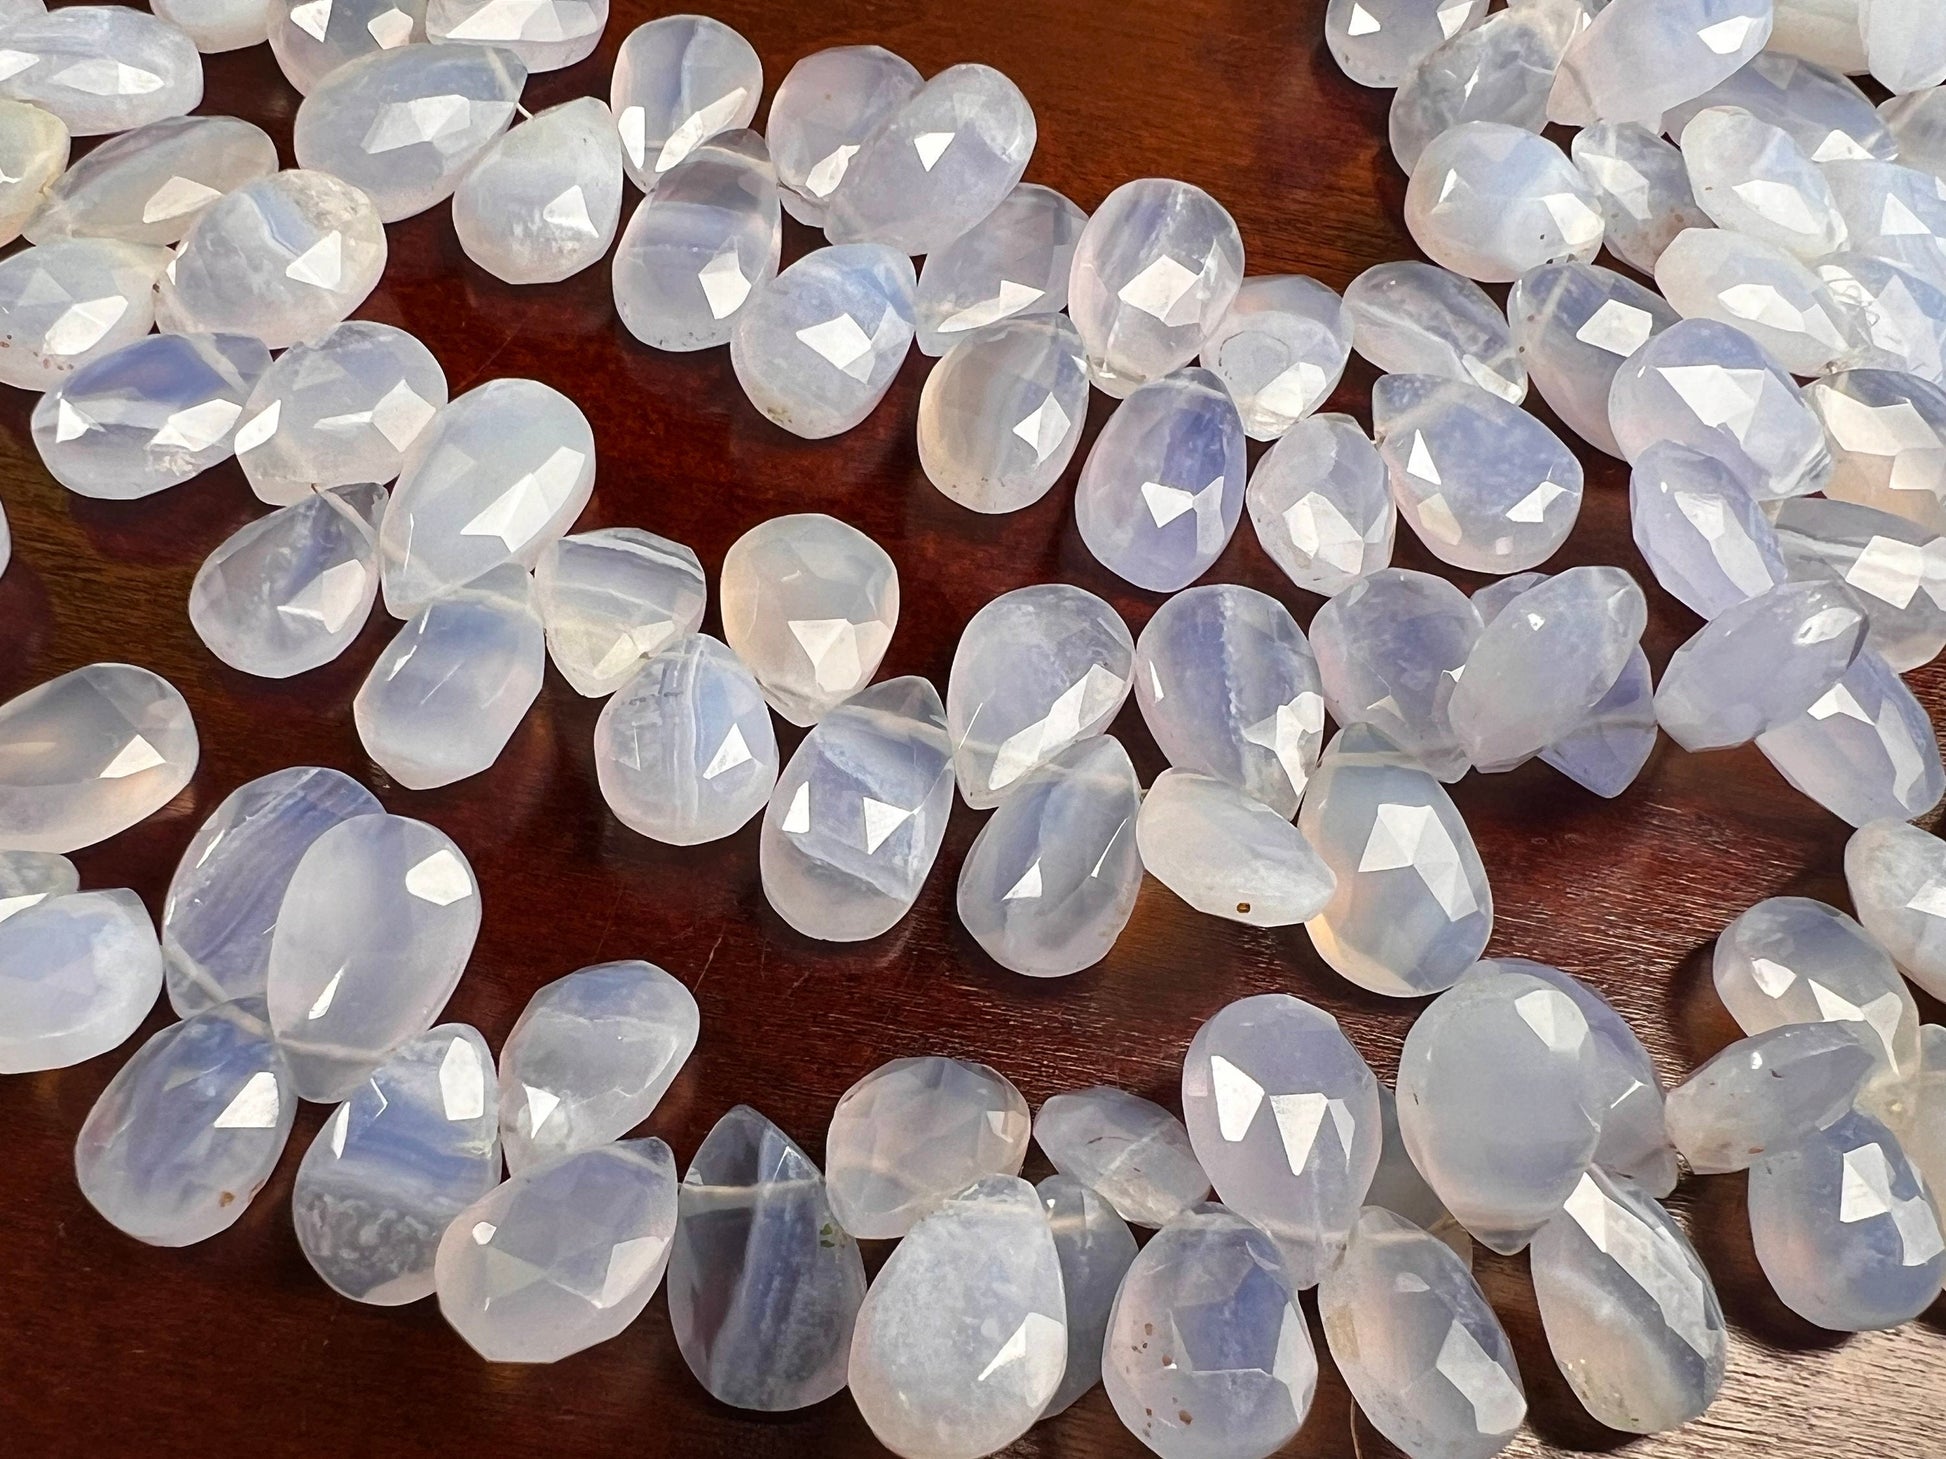 Natural Sky Blue Chalcedony Briolette Faceted 9x15mm large Drop Jewelry Making Gemstone beads 4pcs, 10cs, 20 pcs